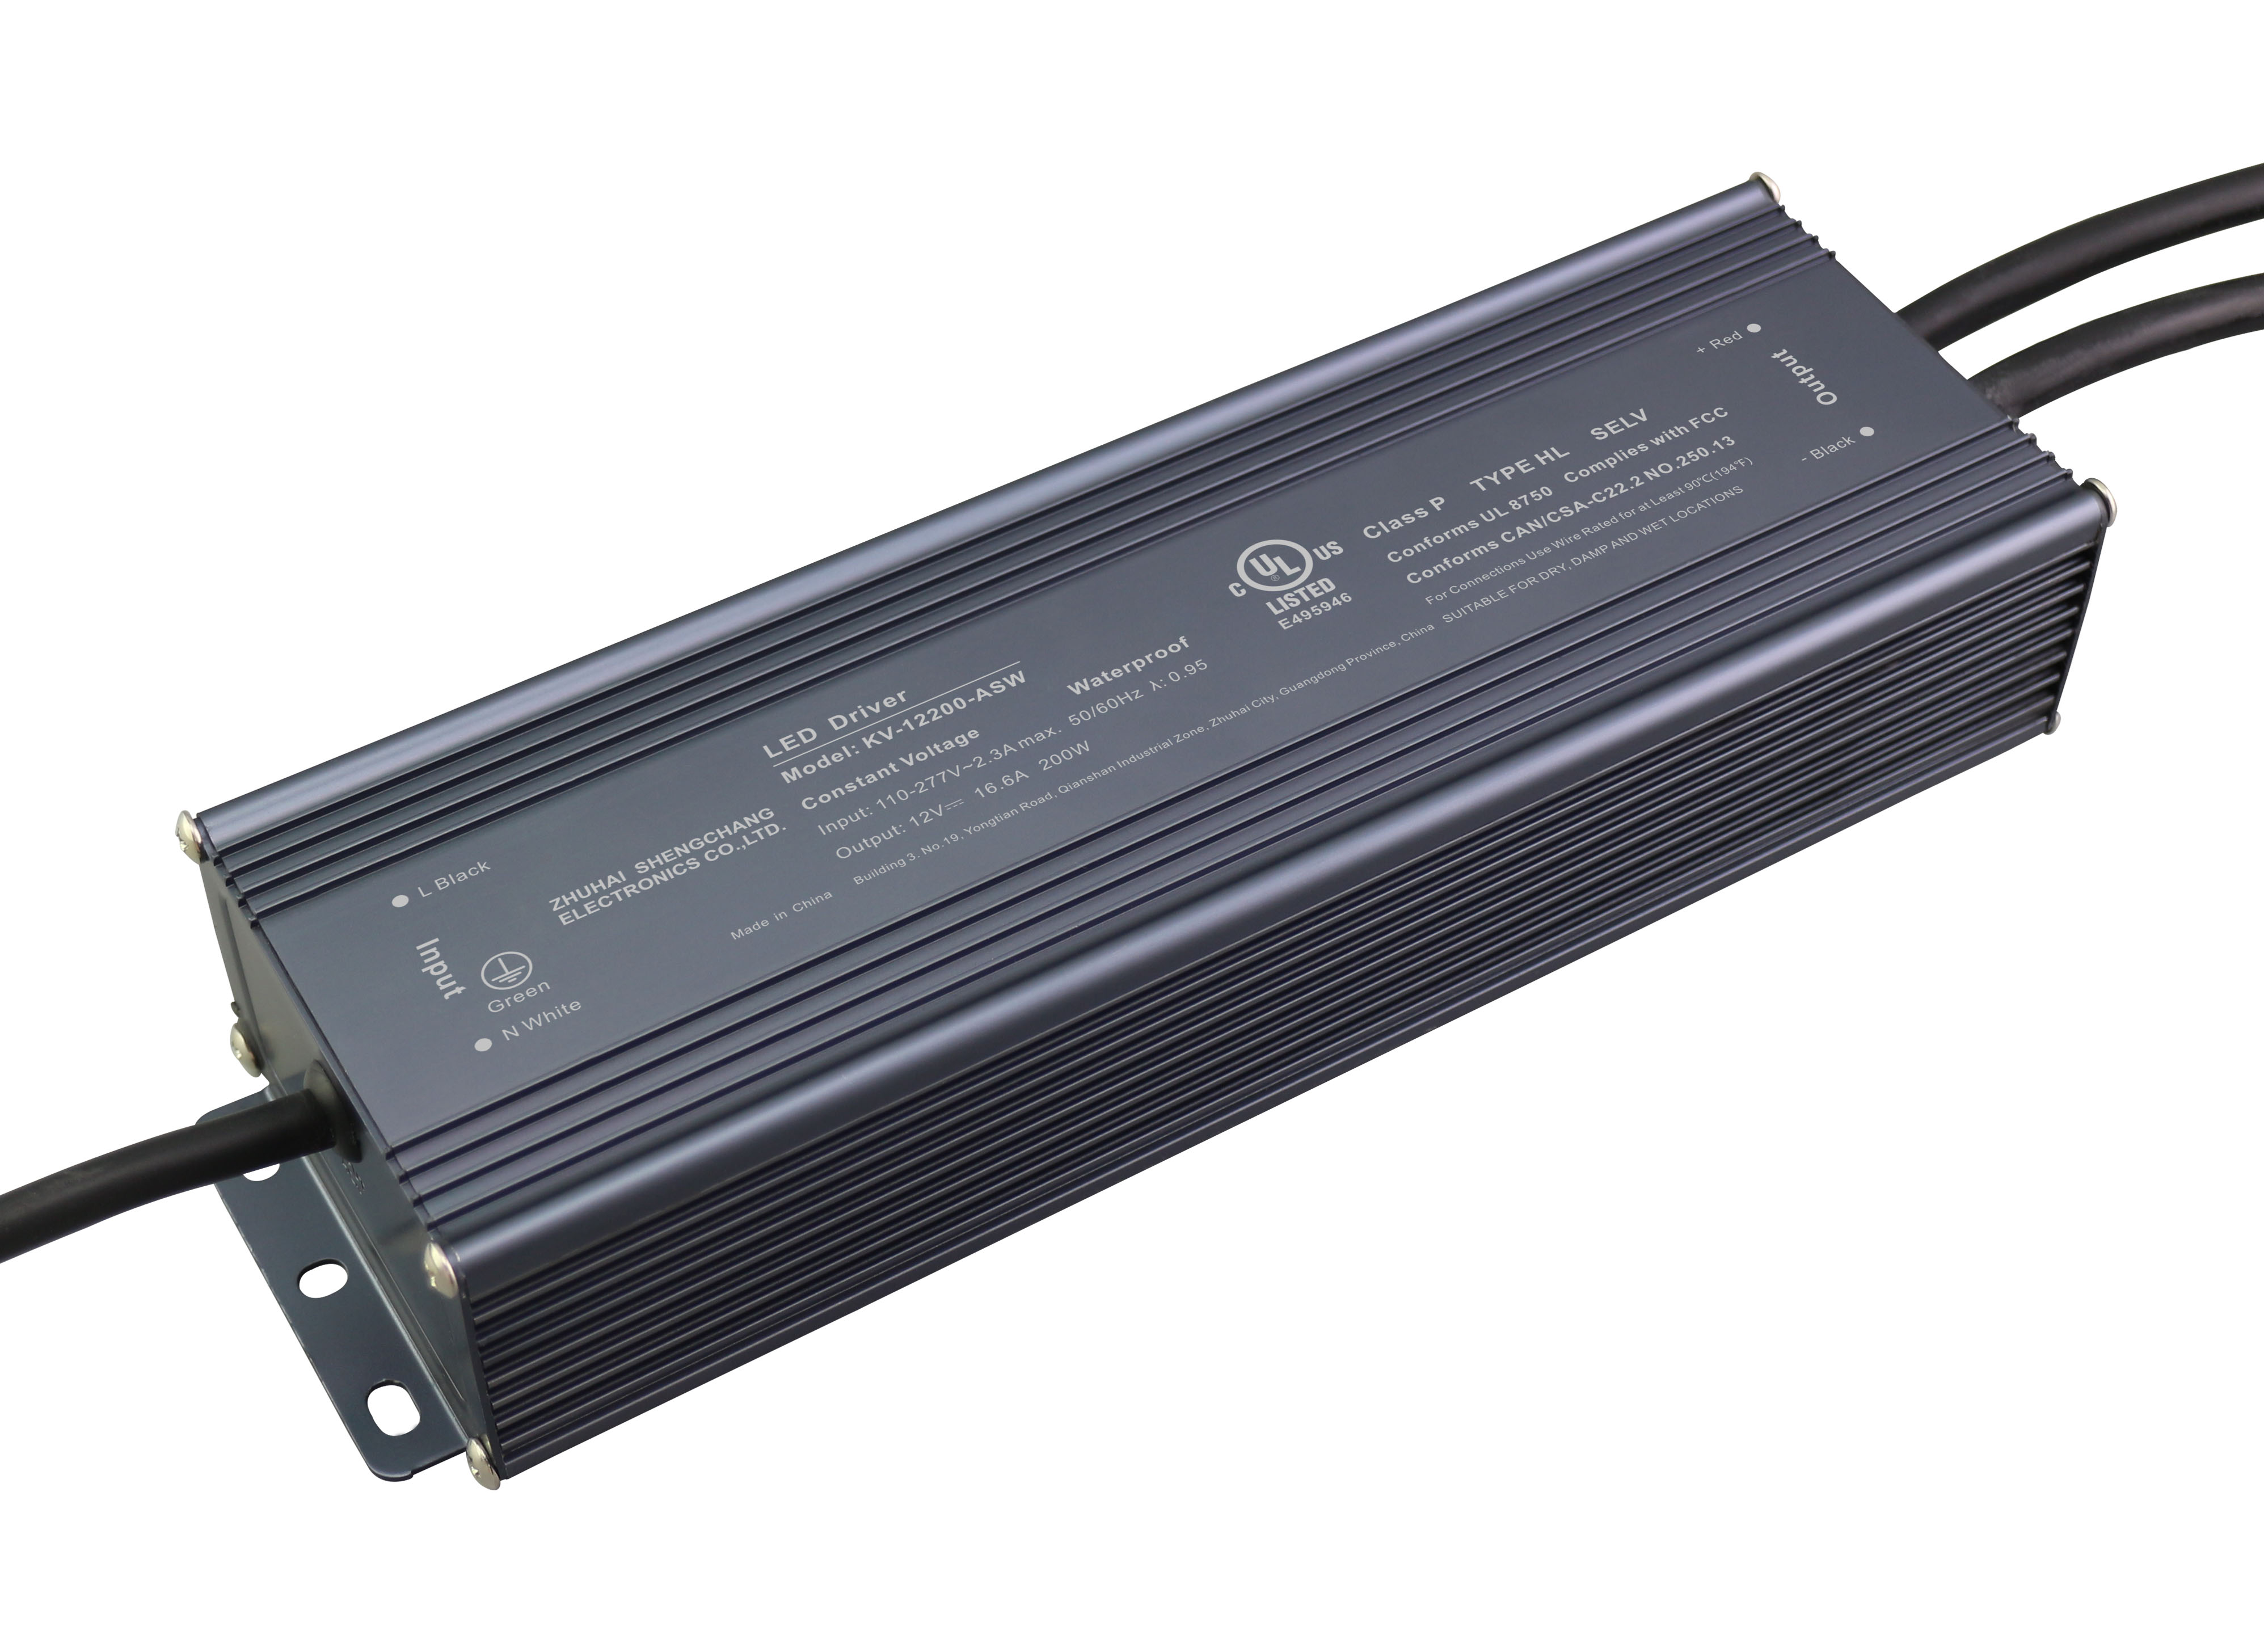 KV-ASW Series 200W Constant Voltage Non-Dimming LED Driver